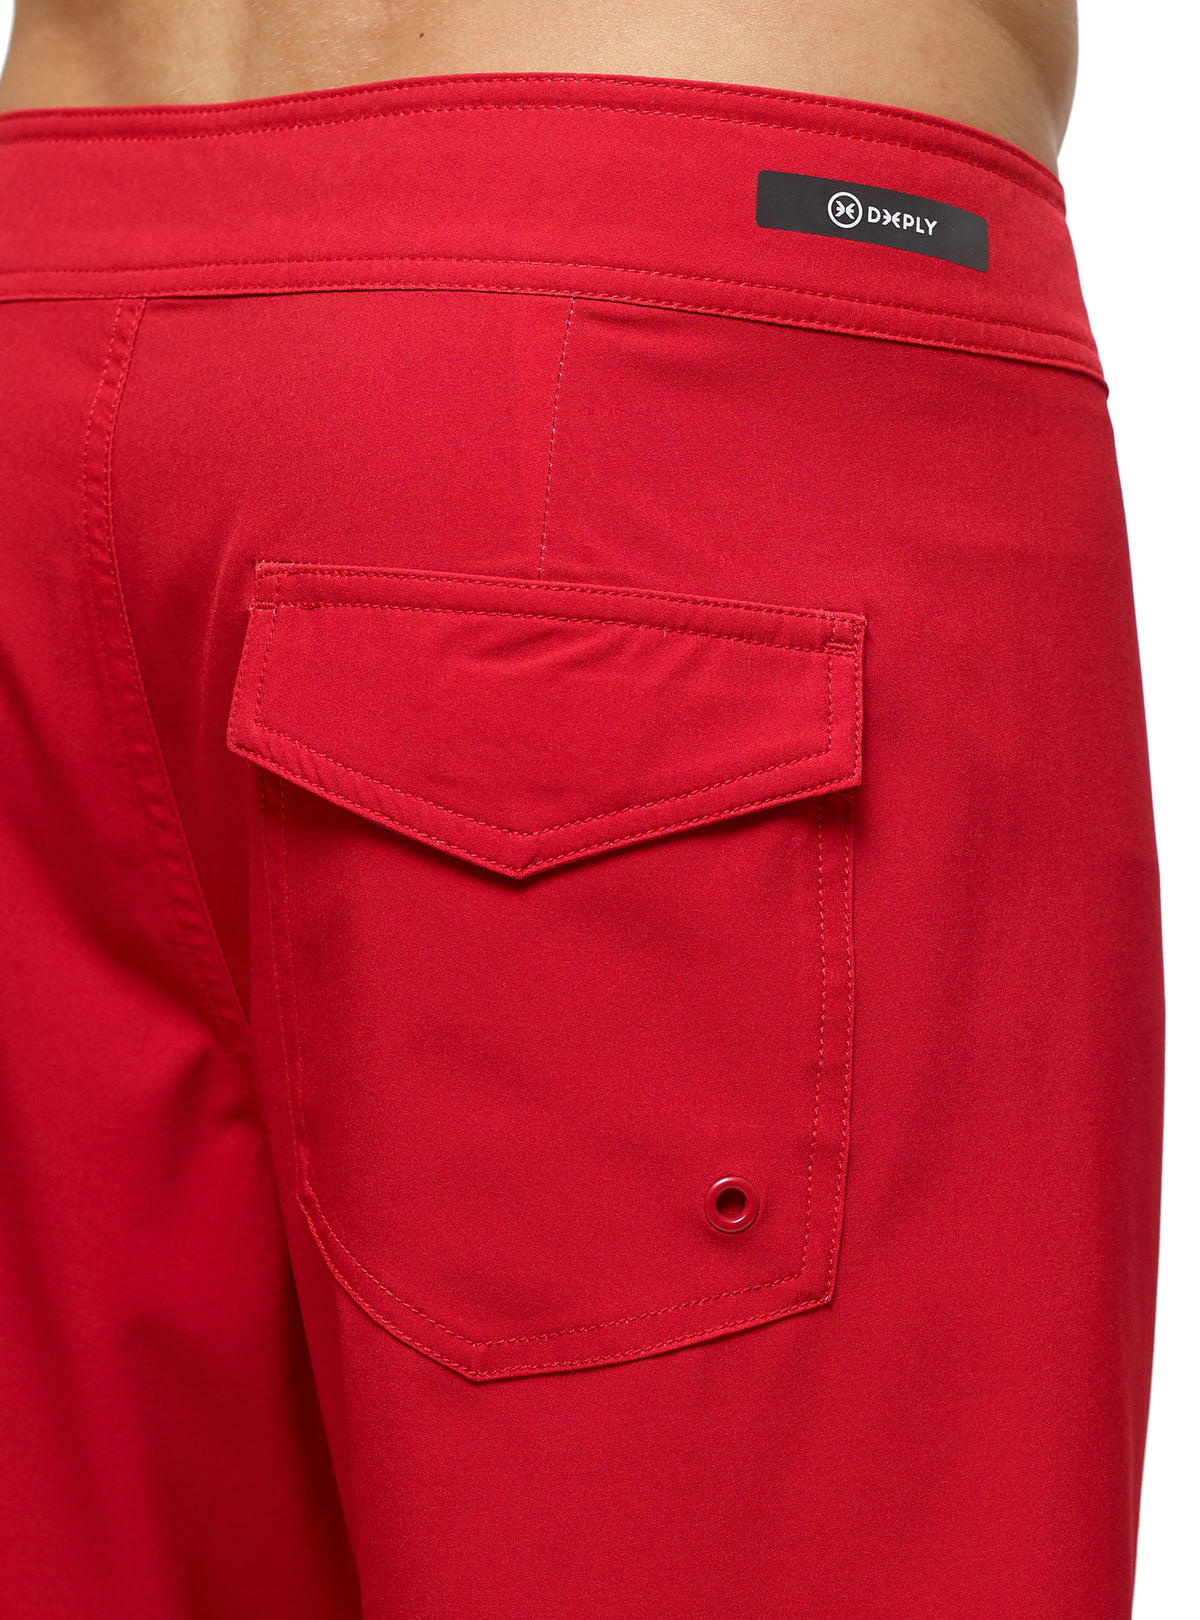 Pyramide Boardshort Red – Deeply - Europe